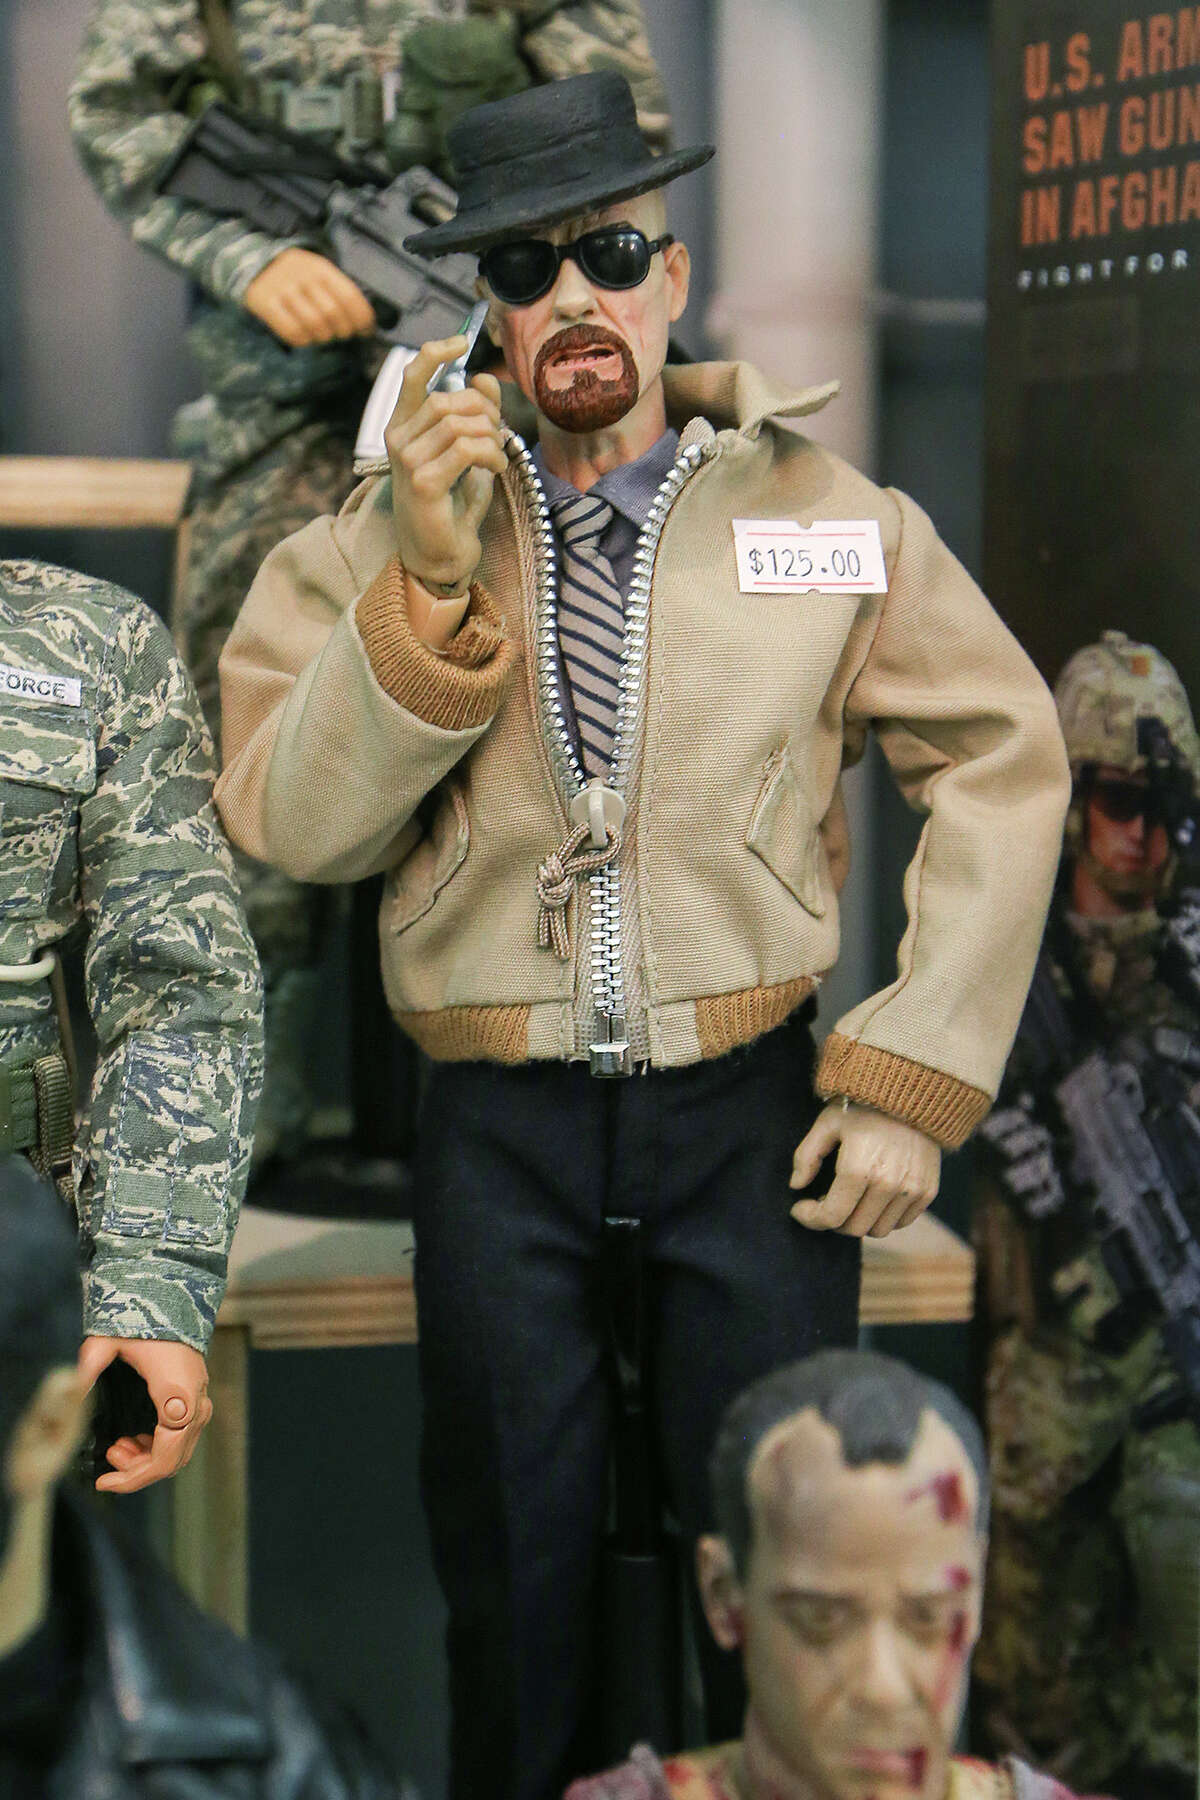 Breaking Bad's Walter White is one of many handmade 1/6 scale action figures for sale by San Antonian Rick Sollers of R.C. Custom Toys at the 2014 Texas Toy Soldier Show at the Menger Hotel on Sunday, May 25, 2014. Photo by Marvin Pfeiffer / EN Communities